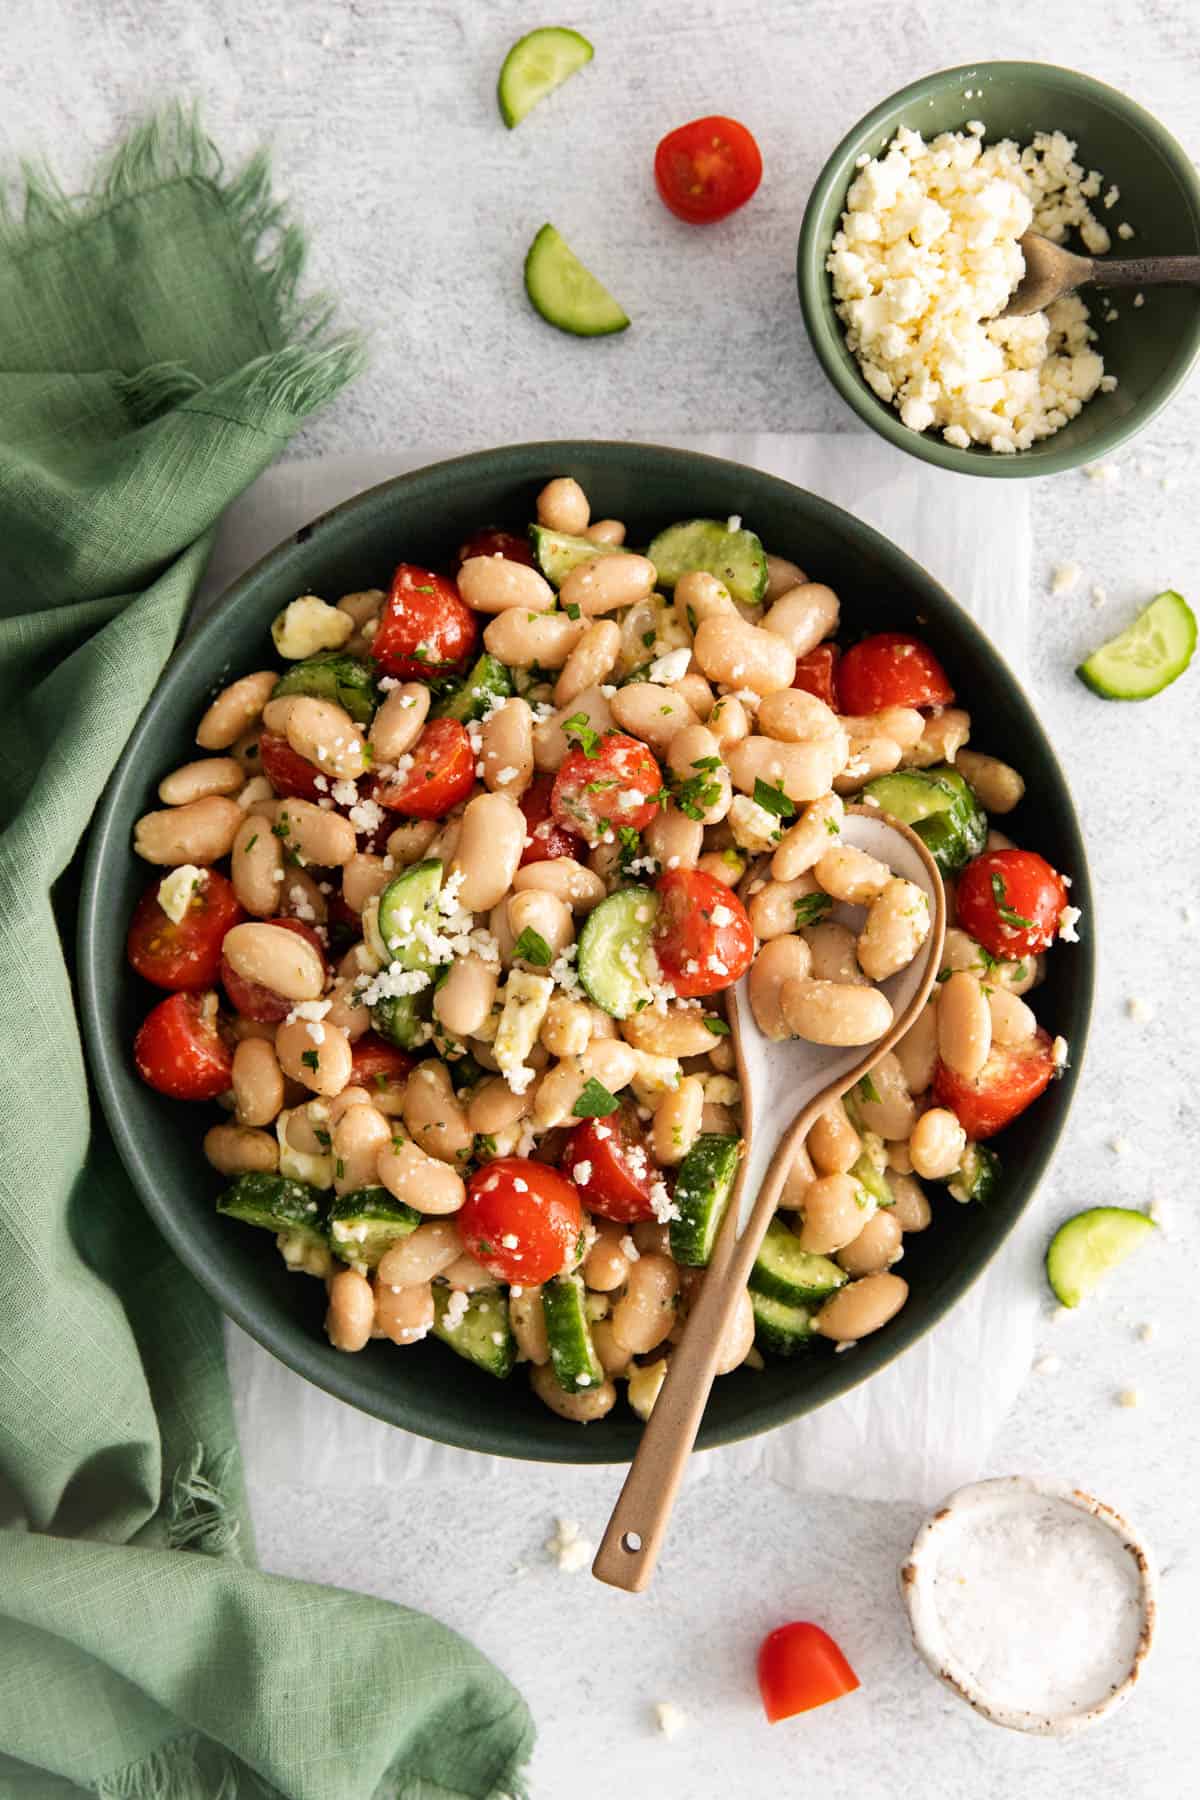 A spoon in Mediterranean white bean salad on a green plate next to a green cloth napkin surrounded by cherry tomatoes, cucumber slices, and feta cheese.